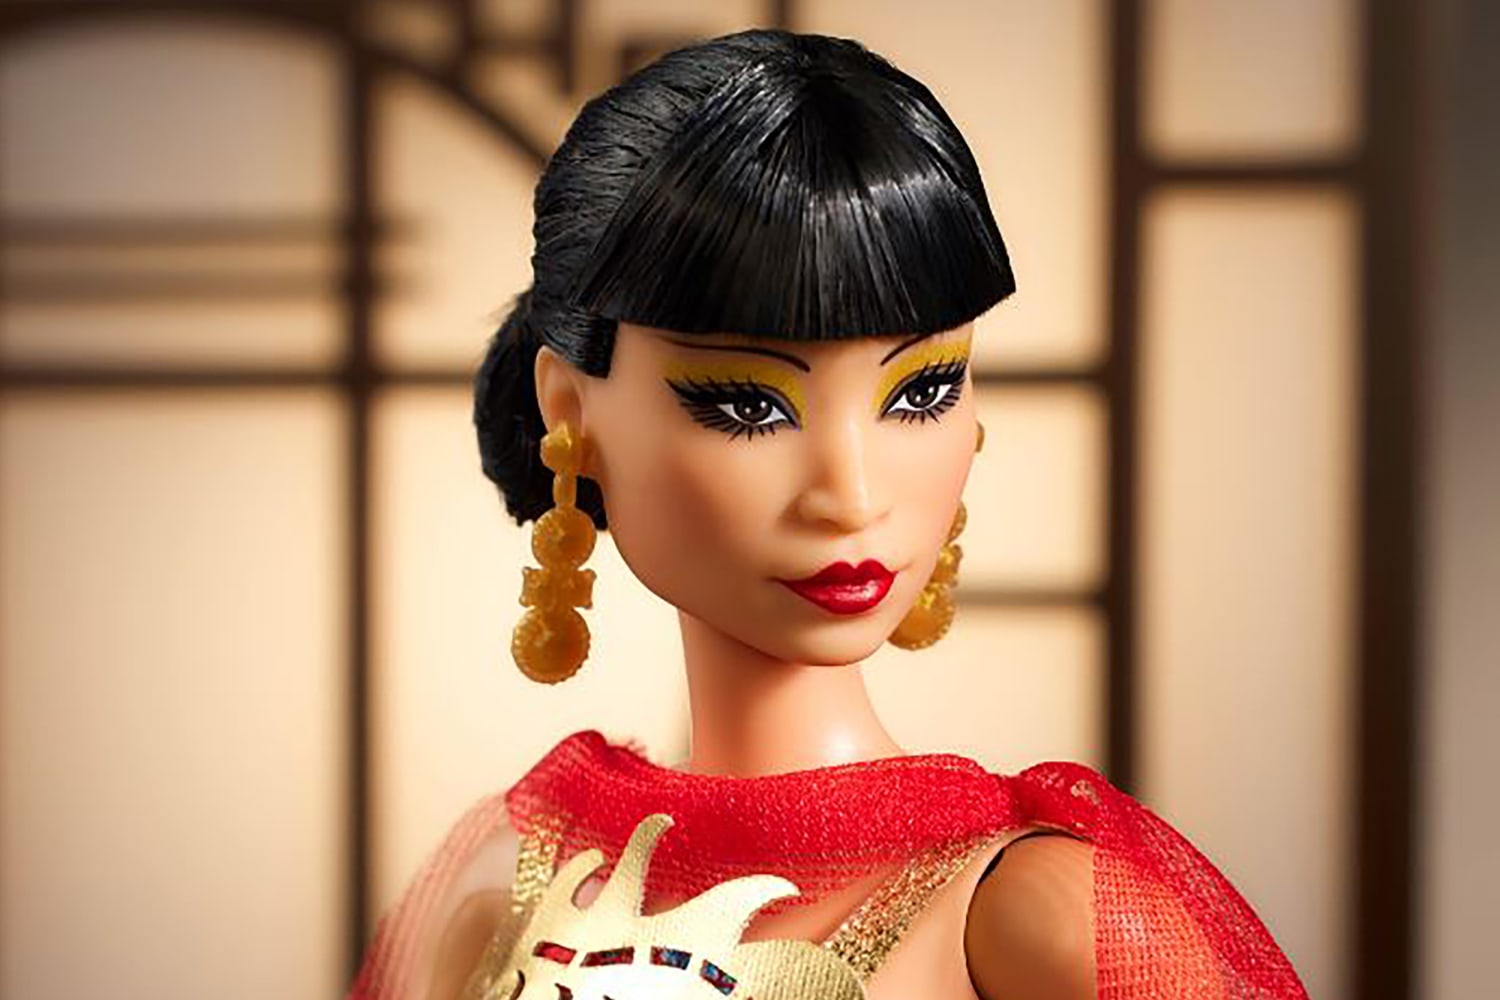 What a doll! The most popular Barbies in her 60-year history